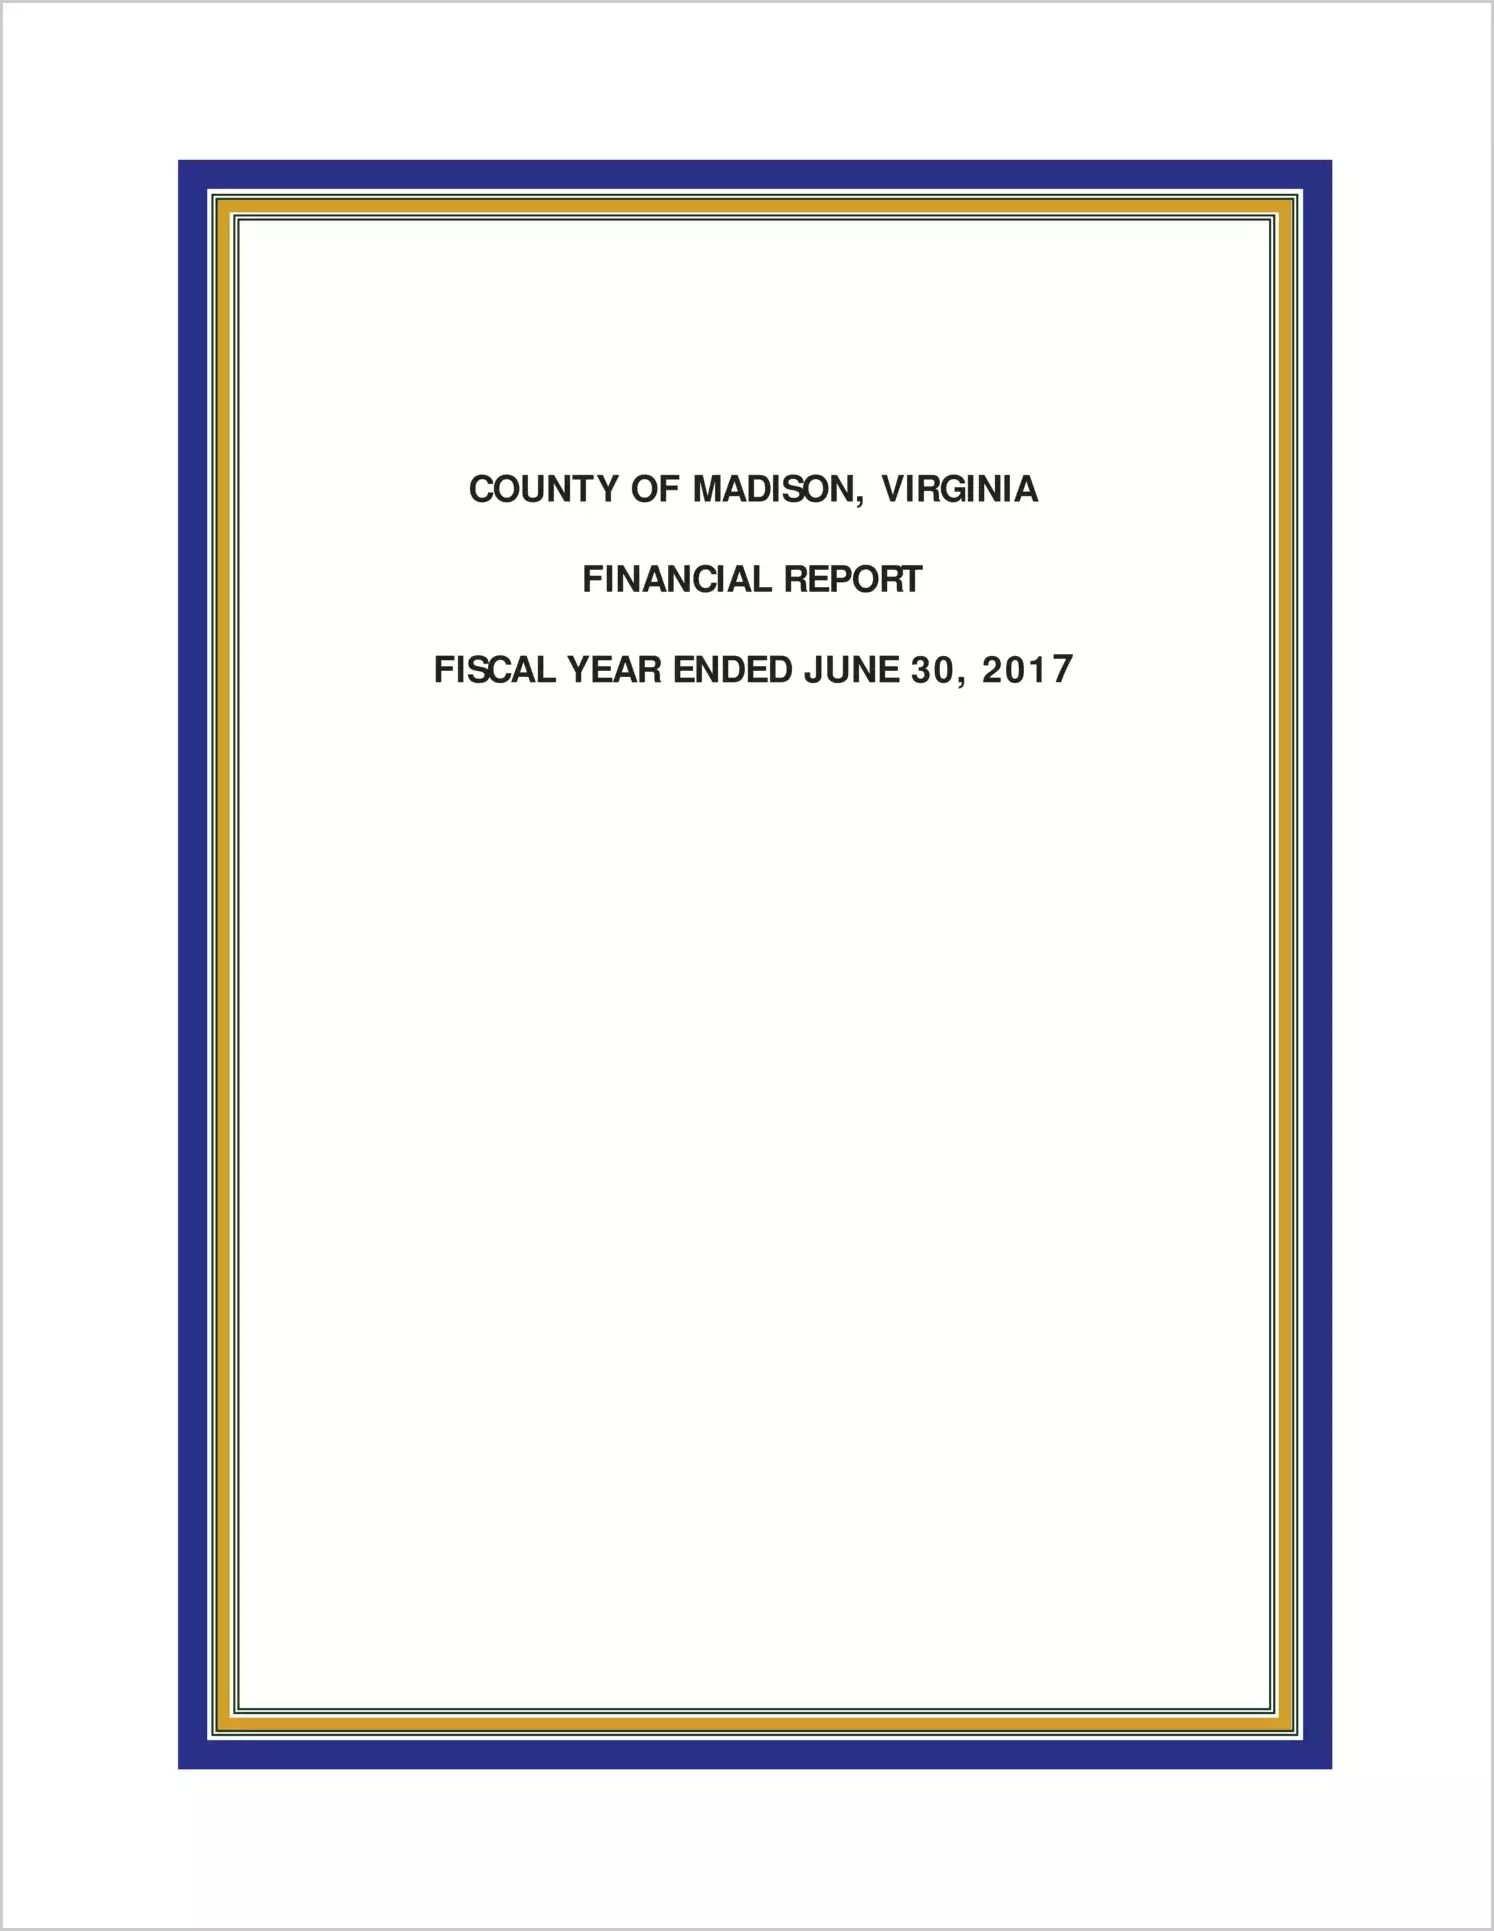 2017 Annual Financial Report for County of Madison